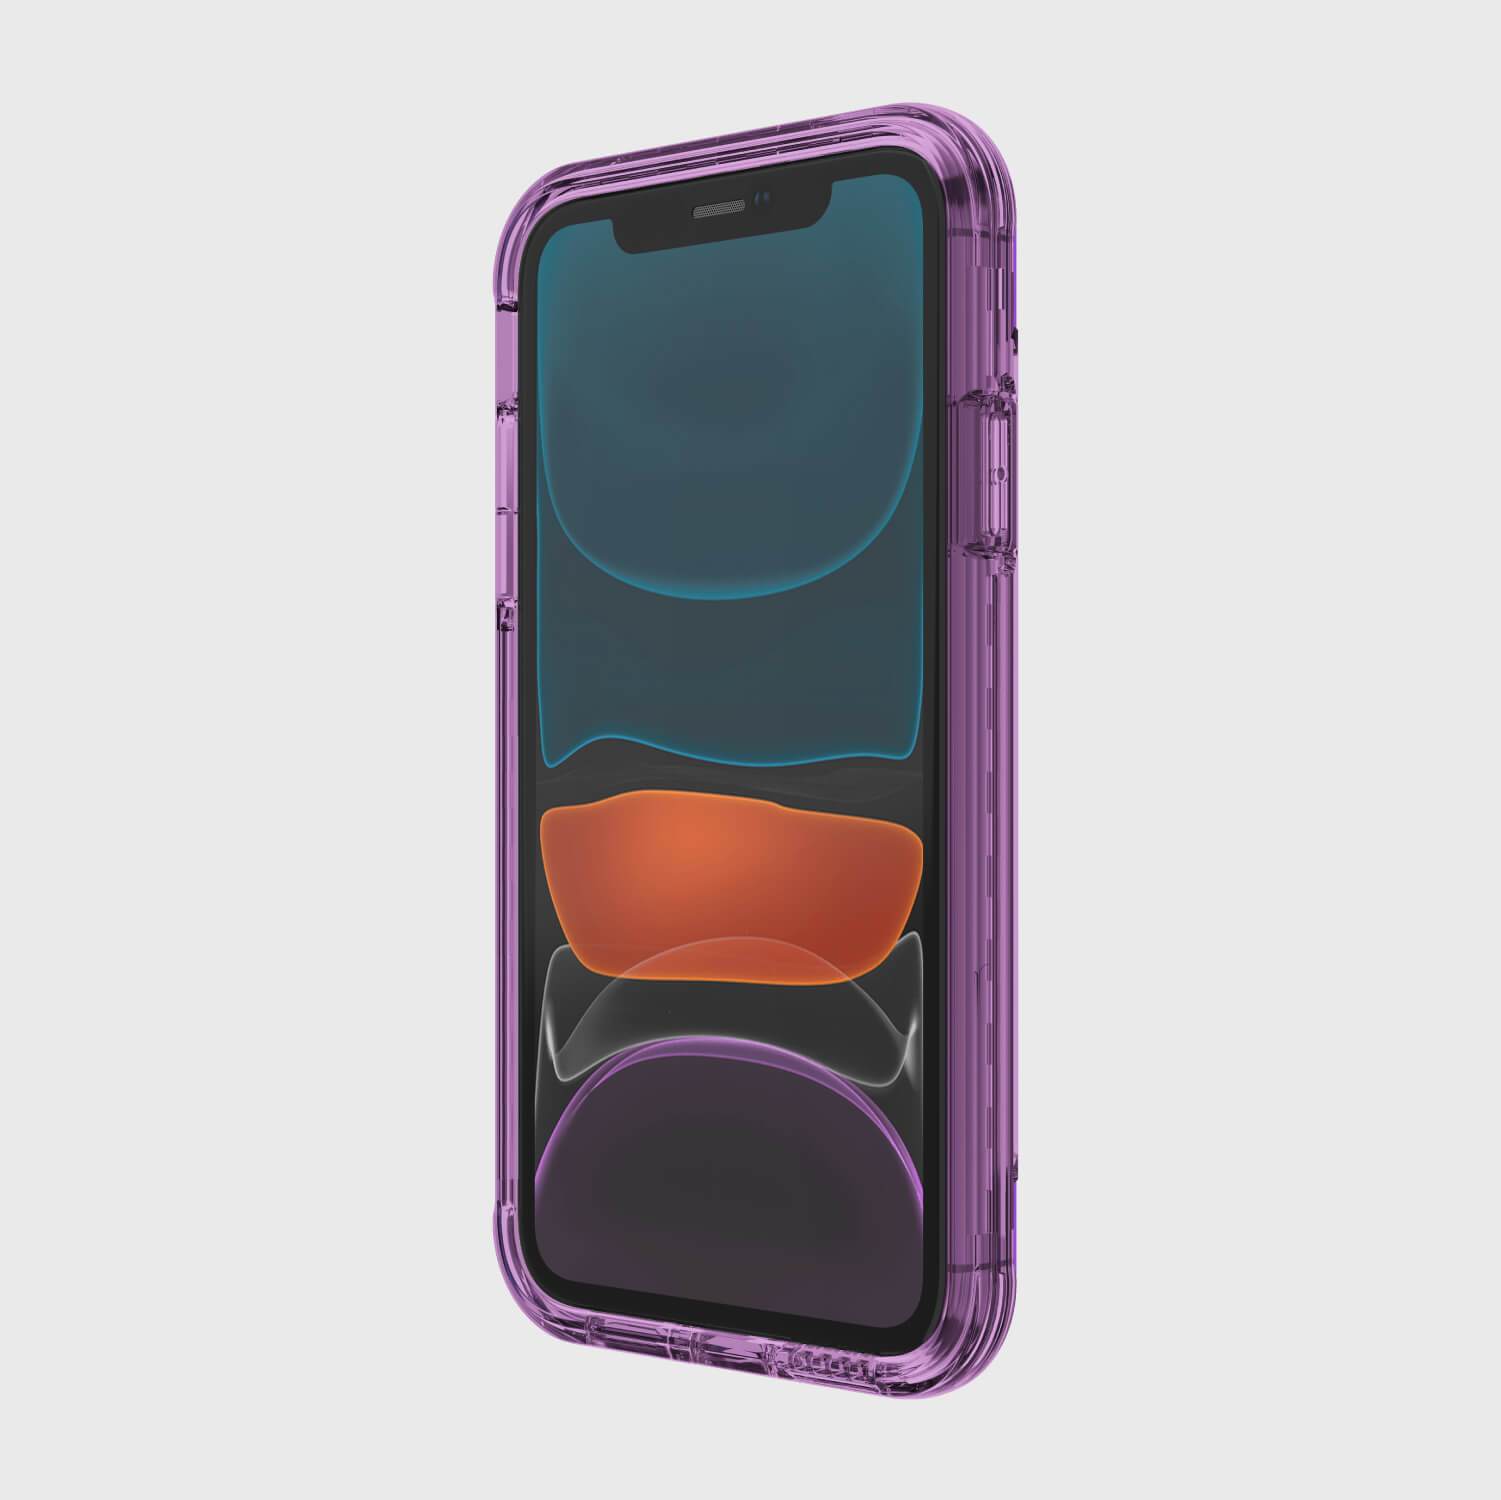 A Raptic Air iPhone 11 Pro Max case providing 13-foot drop protection in purple becomes A Raptic AIR iPhone 11 Pro Max Case - AIR providing 13-foot drop protection in purple.